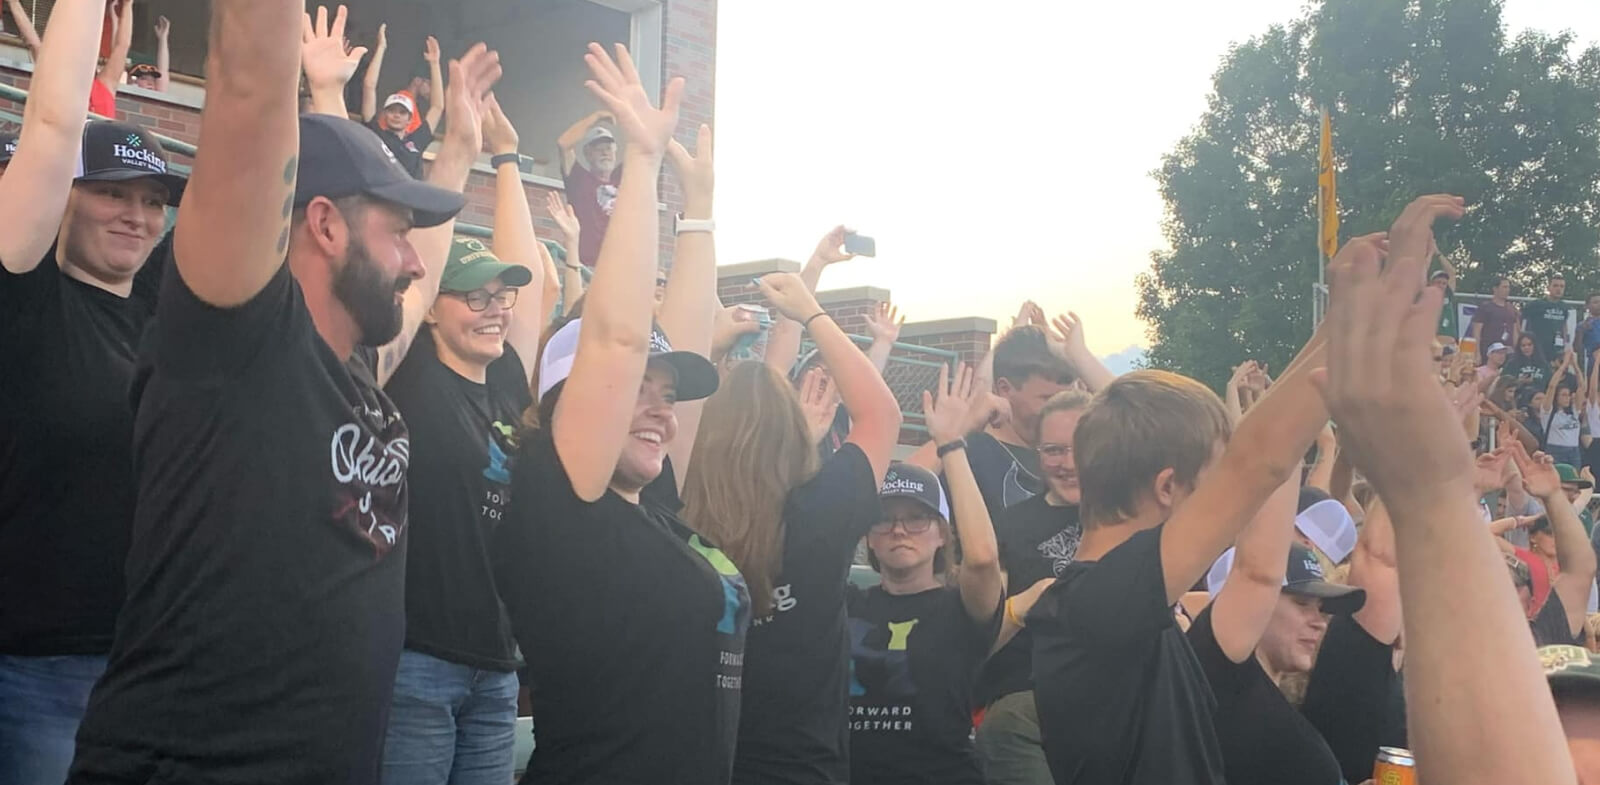 Crowd with hands in the air at a Copperheads baseball game